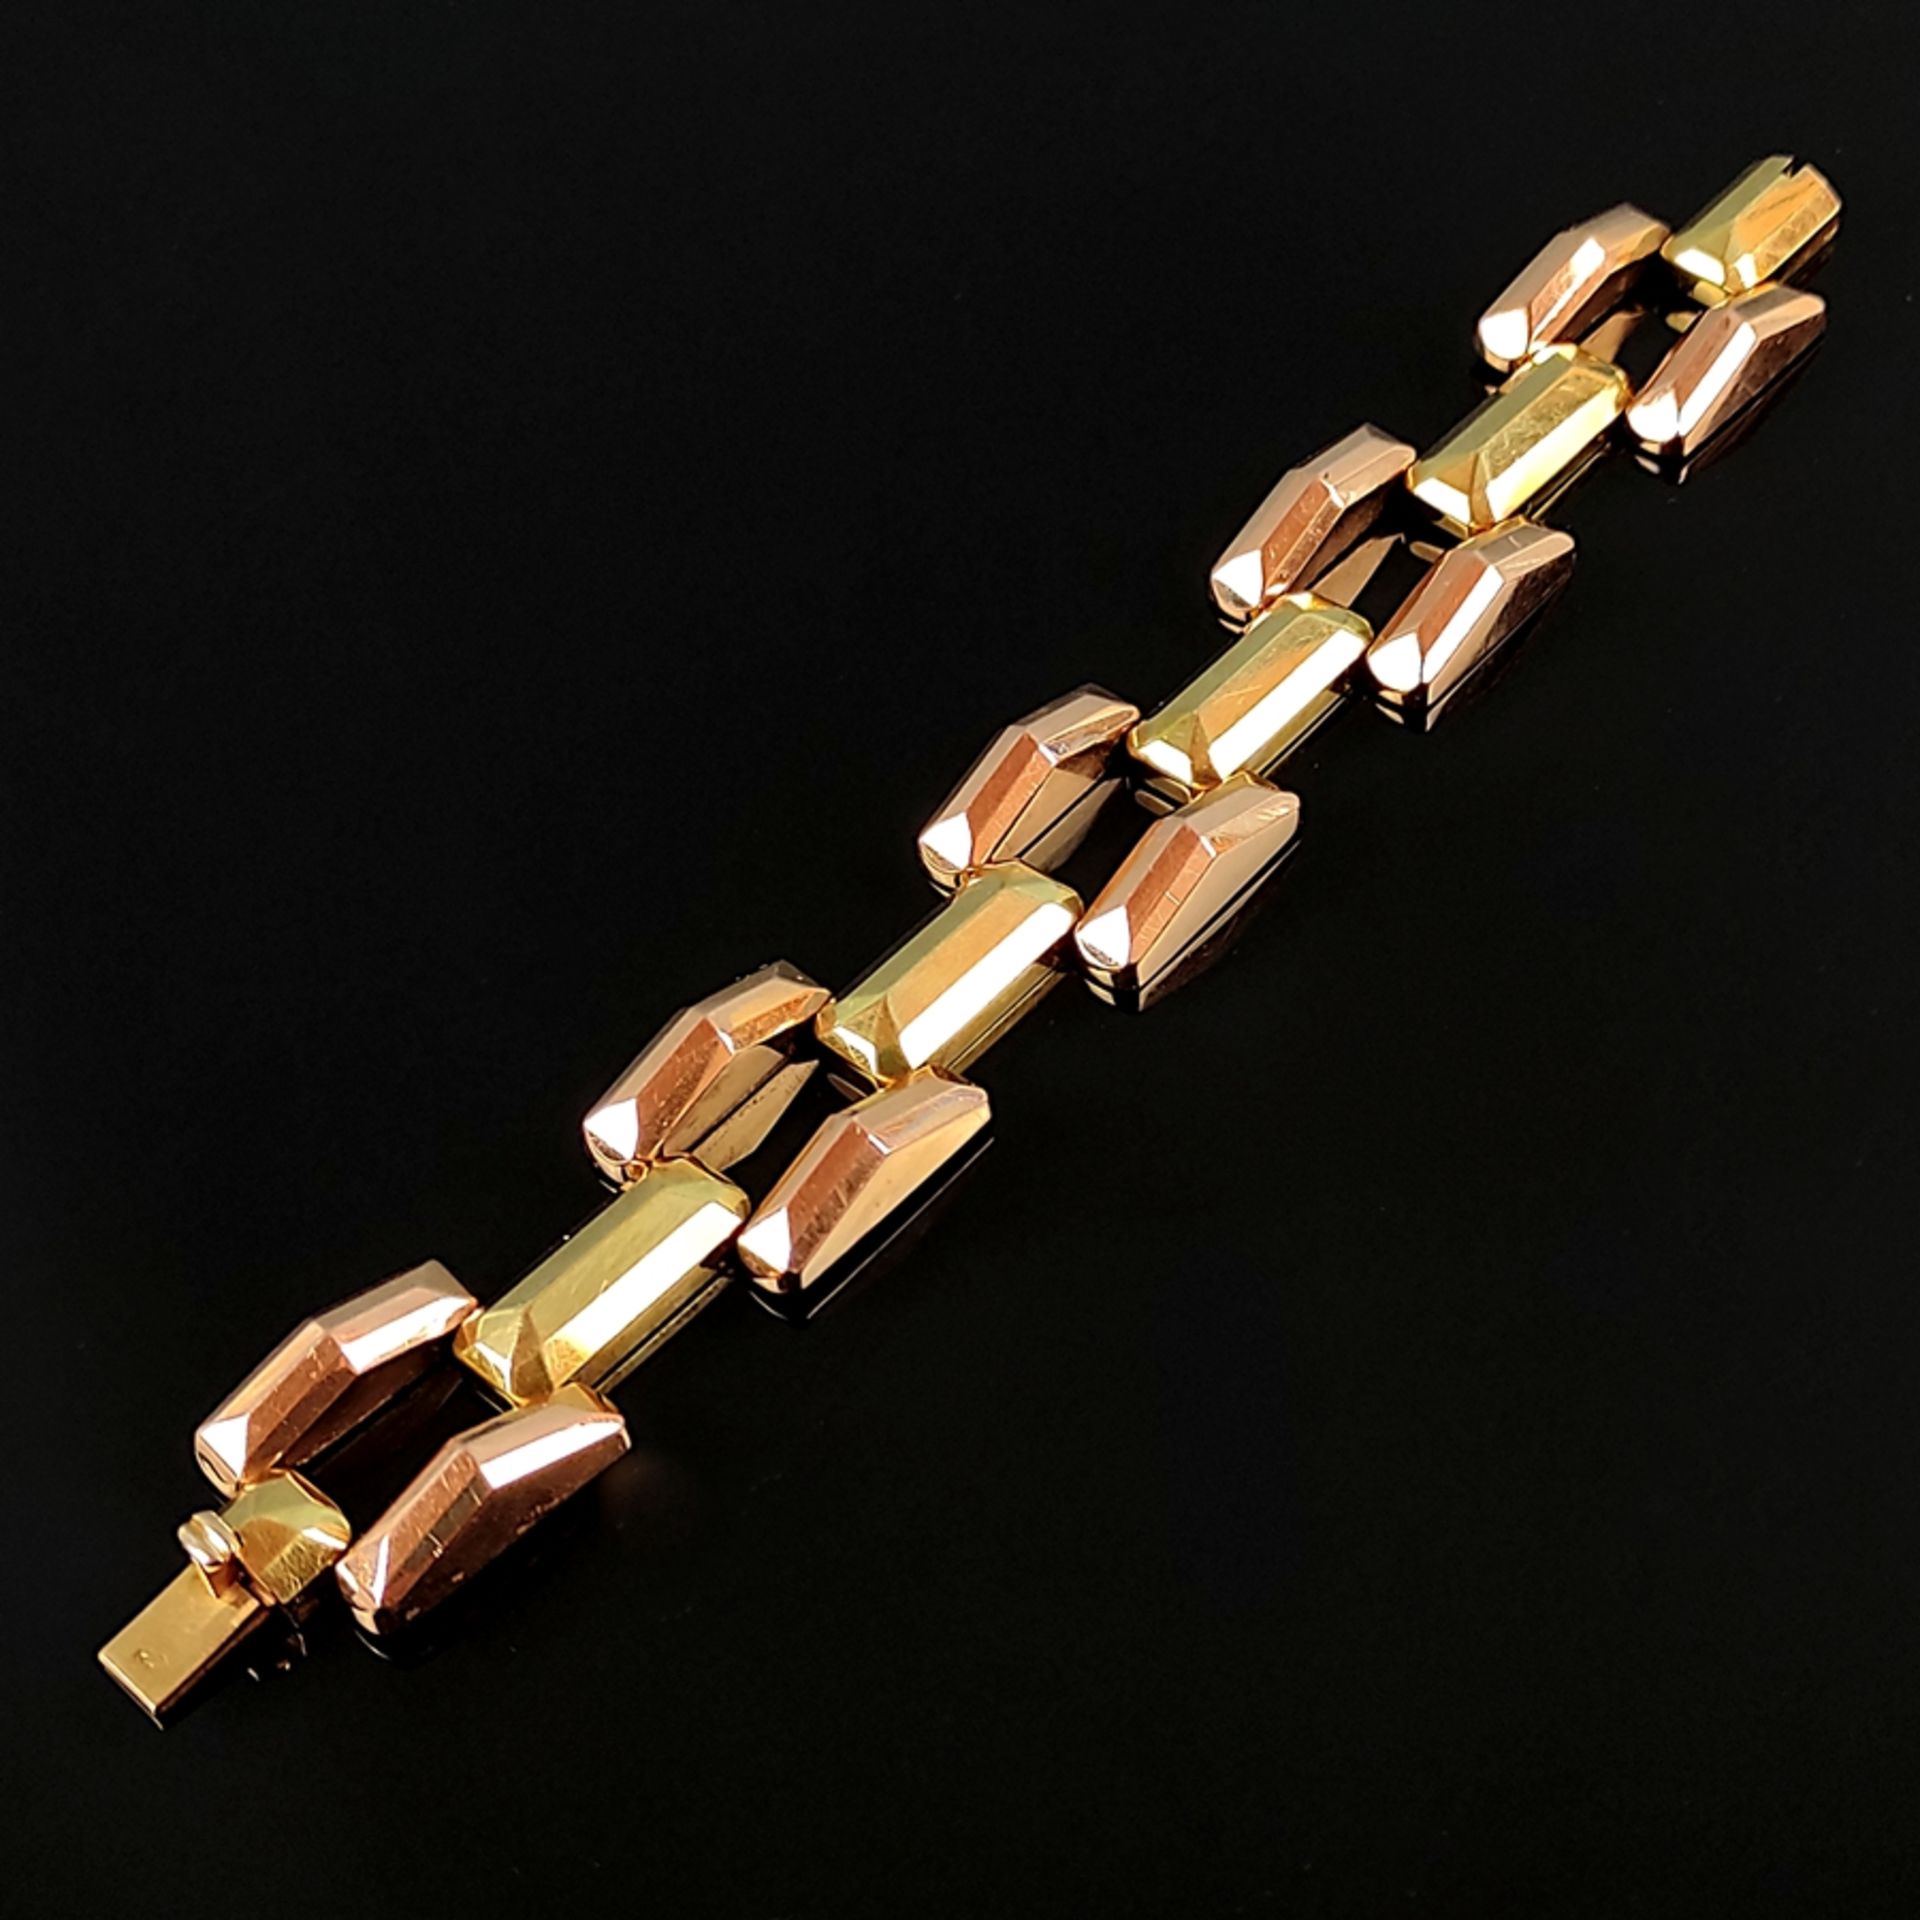 Extravagant vintage bracelet, 585/14K rose/yellow gold, 35.48g, made of links in geometric shapes,  - Image 2 of 3